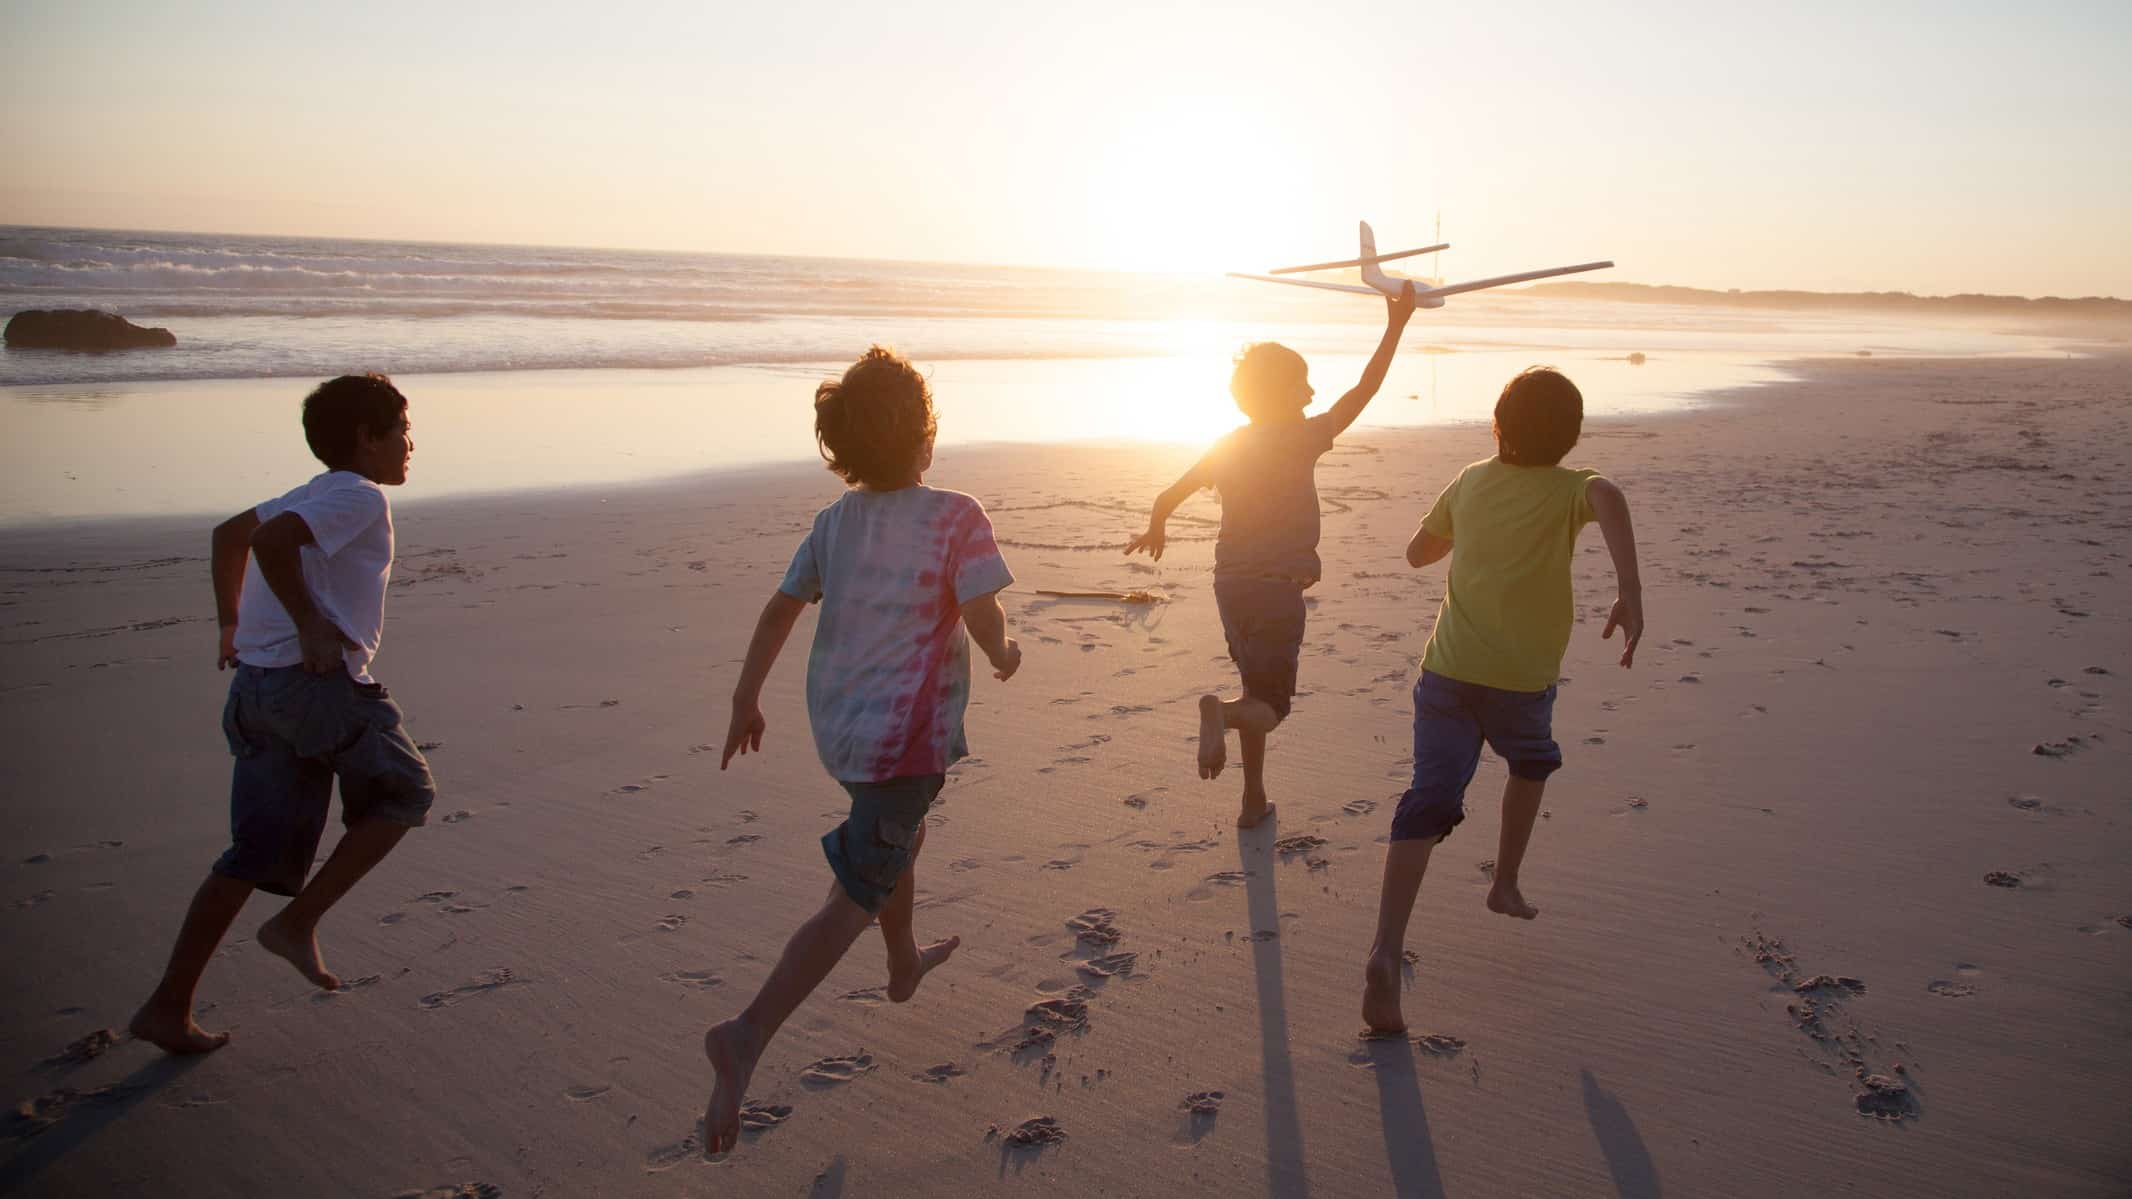 a group of four young boys run along a beach at sunset with the one in front holding aloft a toy aeroplane that is zooming through the air.